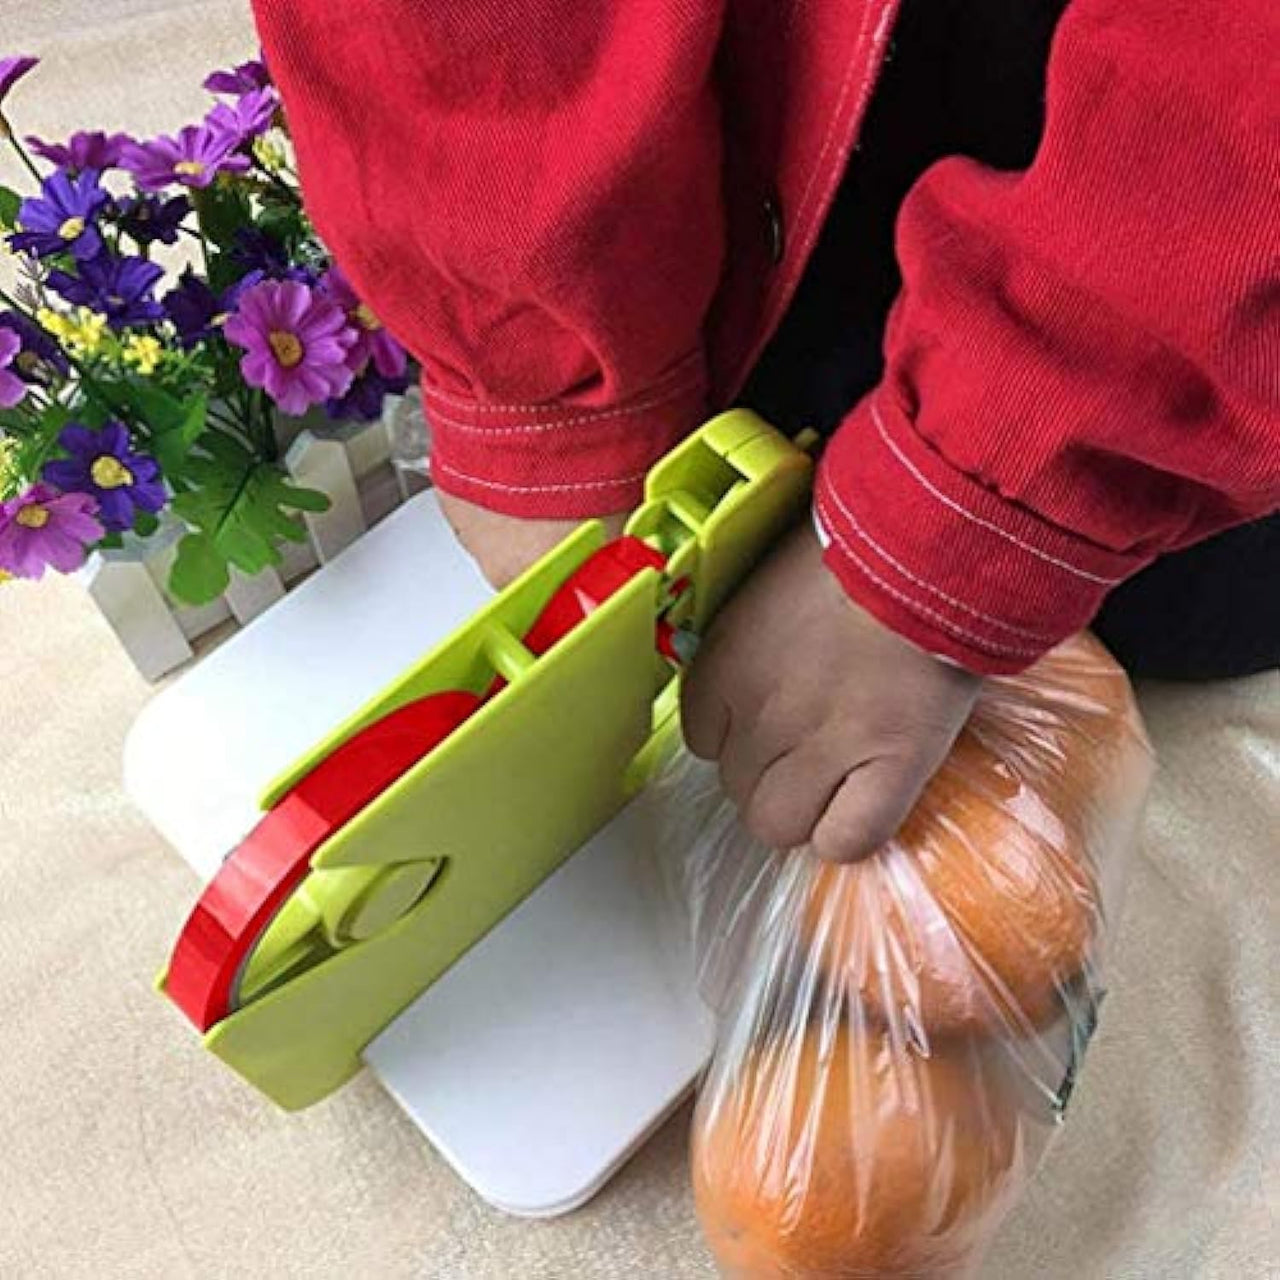 🔥LAST DAY SPECIAL SALE 44% OFF 🔥Bag Sealing Machine